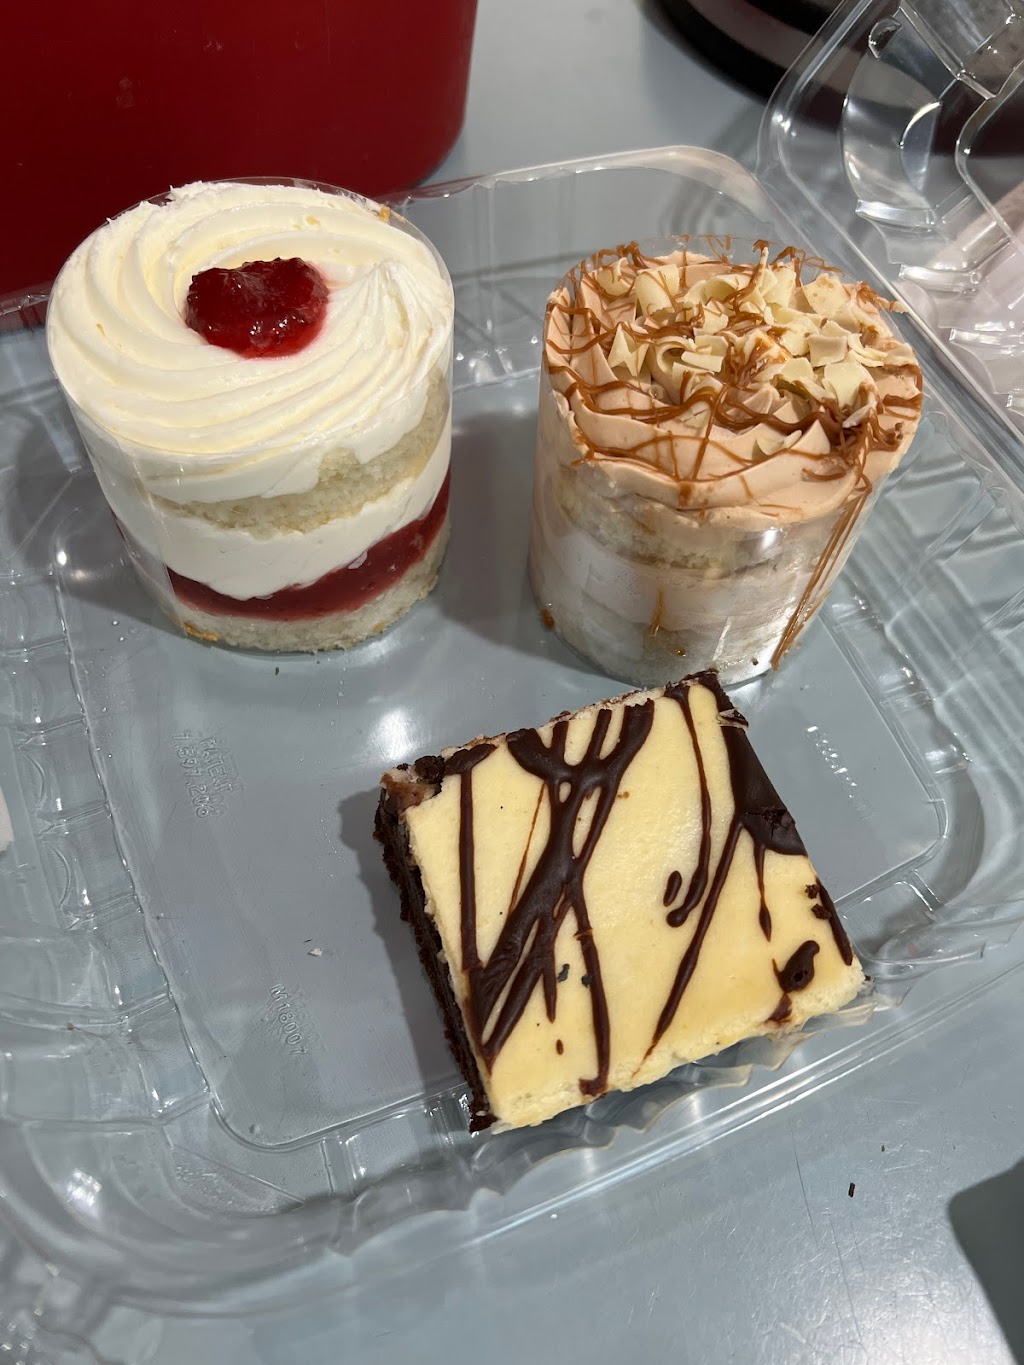 Dalcourts Desserts | 915 County Rd 517, Hackettstown, NJ 07840 | Phone: (908) 269-8238